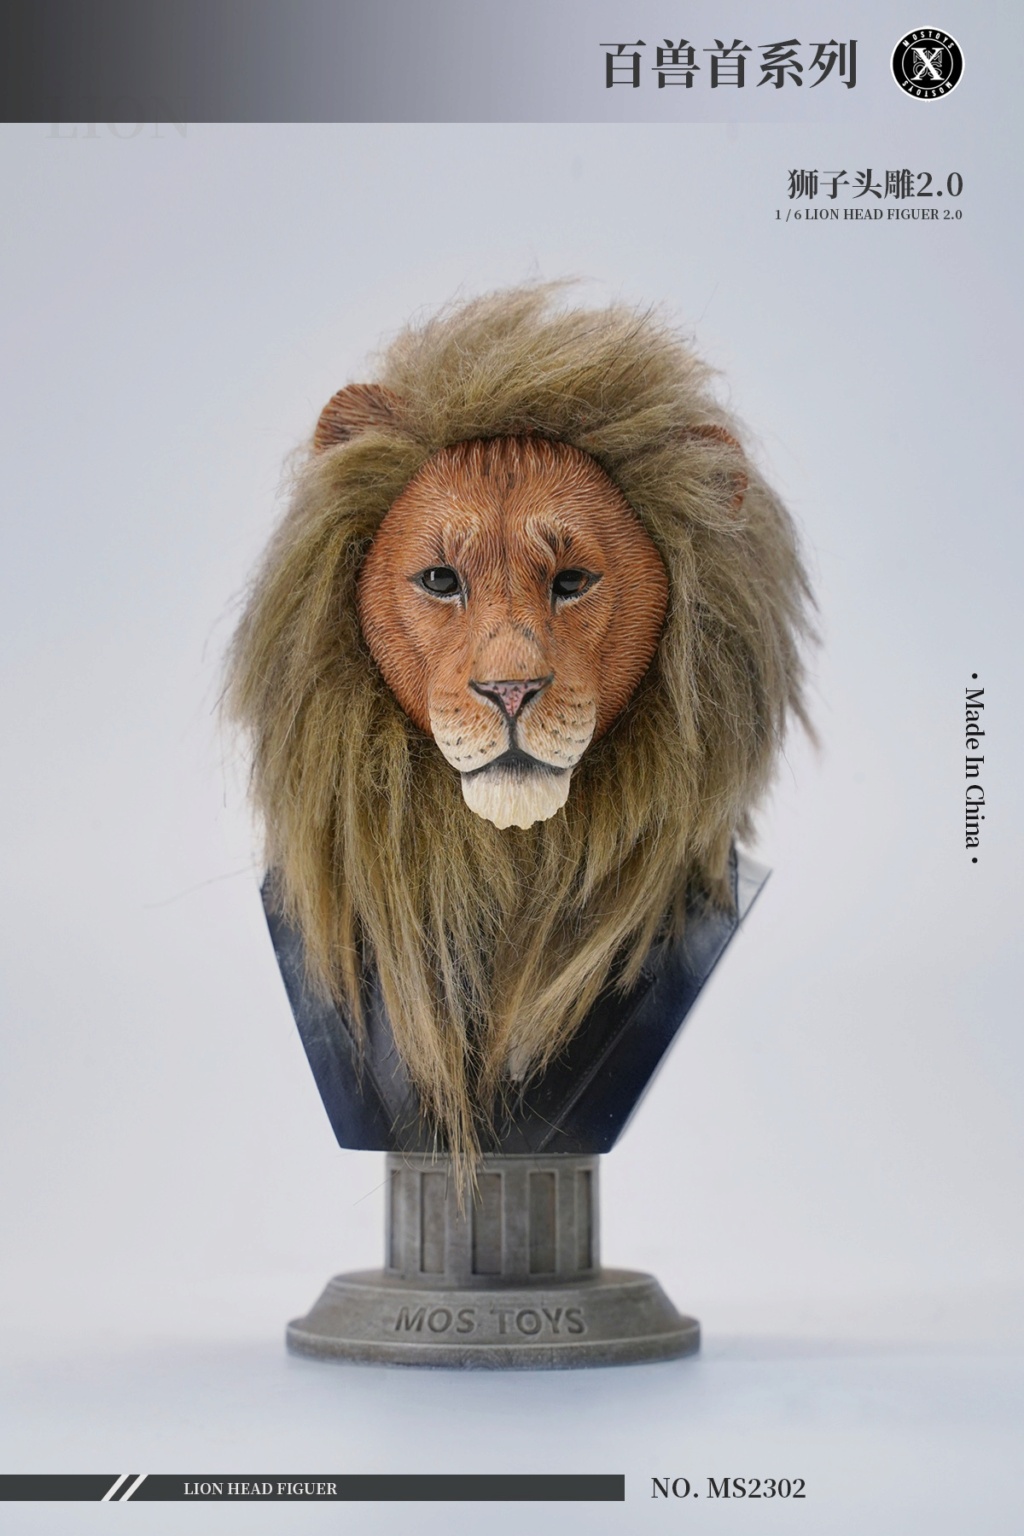 Mostoys - NEW PRODUCT: Mostoys: 1/6 MS2302 lion head sculpture 2.0 16234910